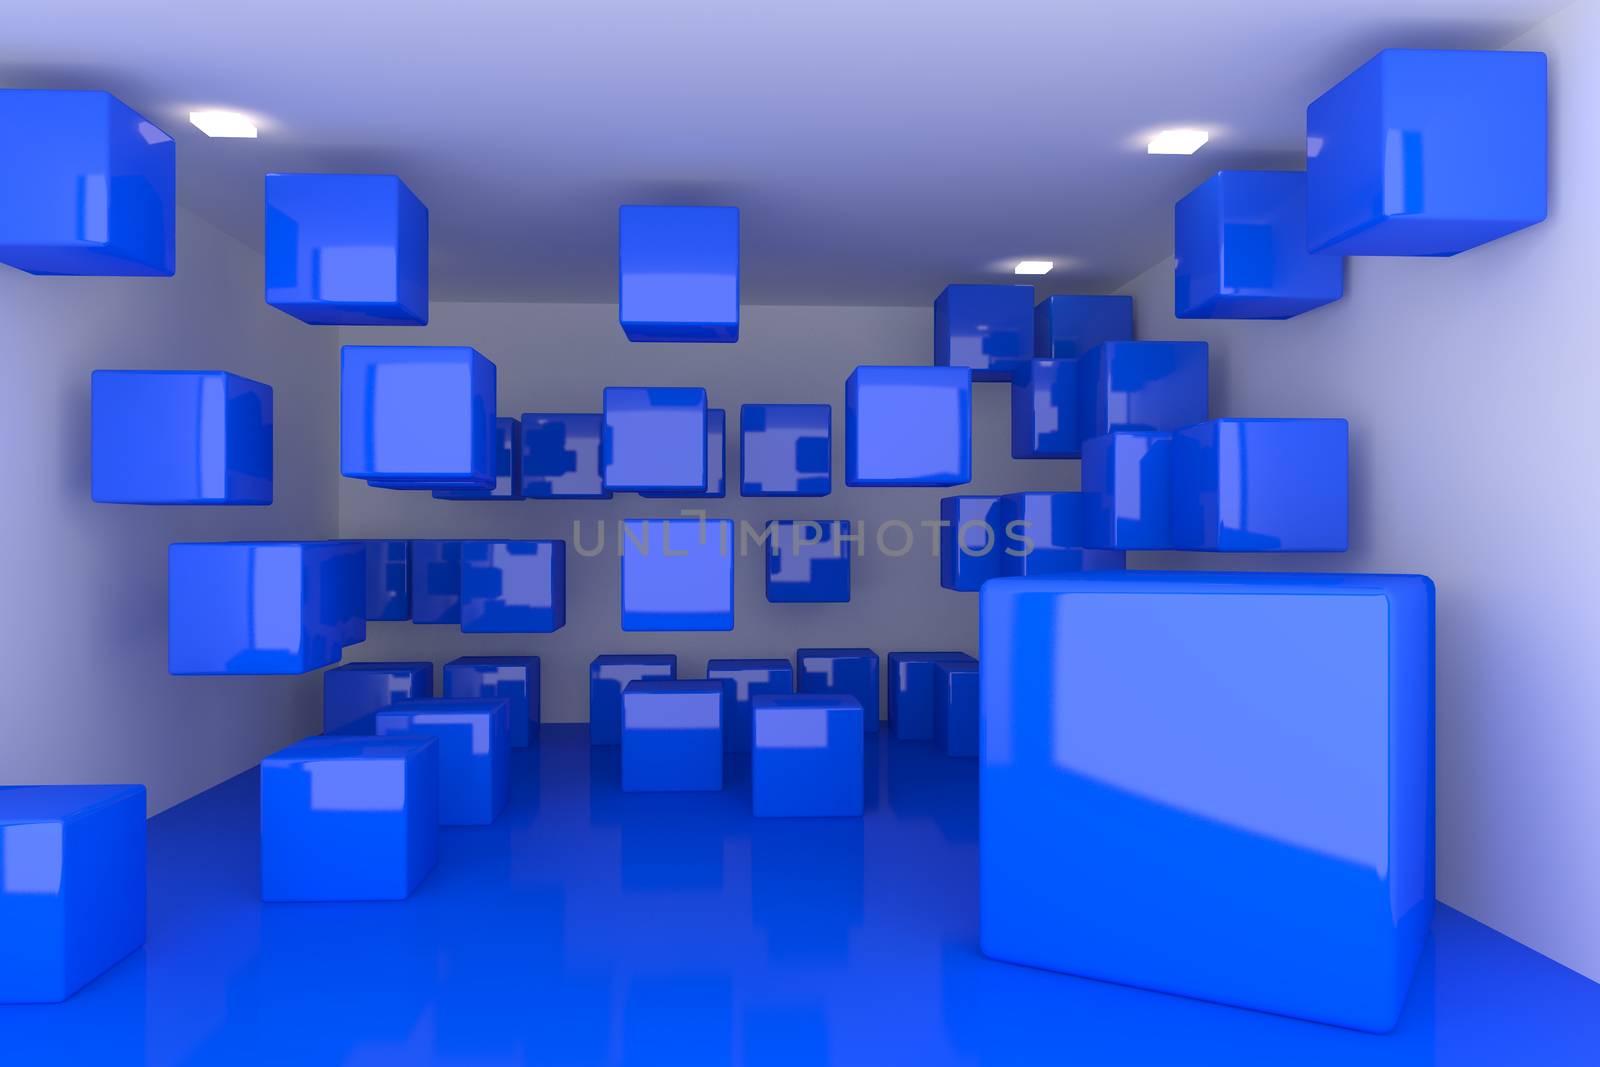 Abstract interior rendering with empty room color box display.